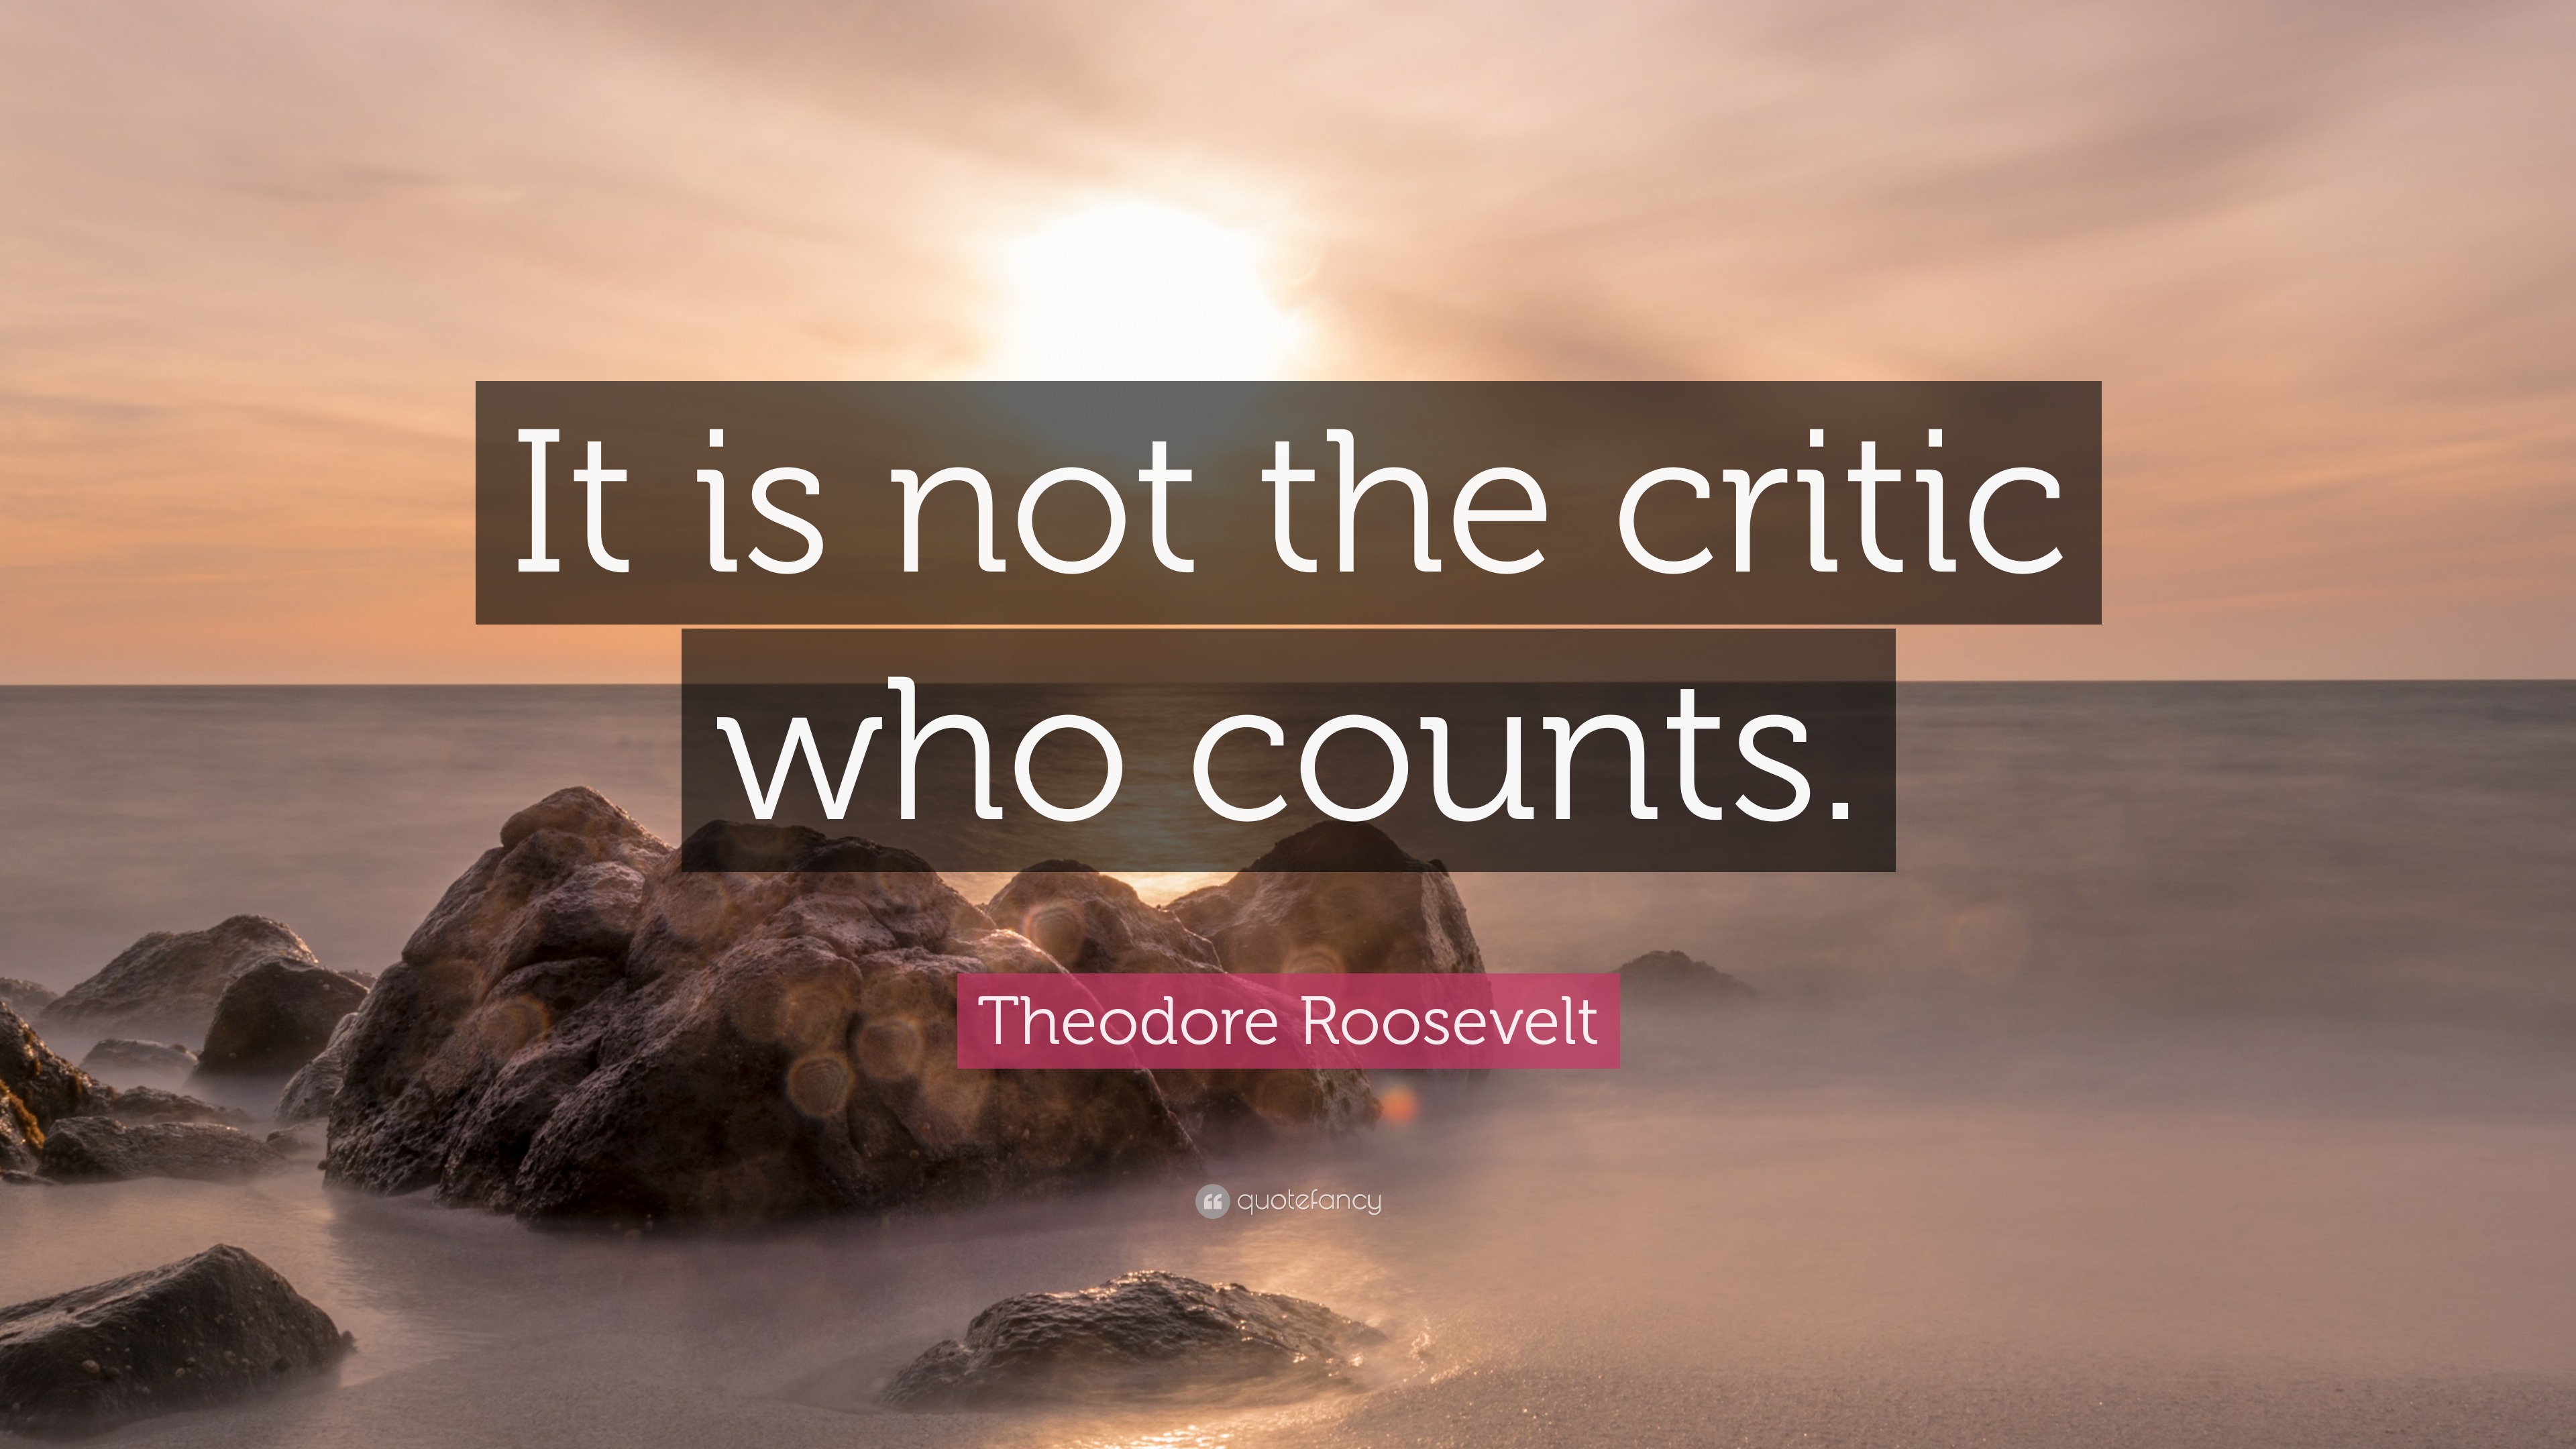 Theodore Roosevelt Quote “It is not the critic who counts